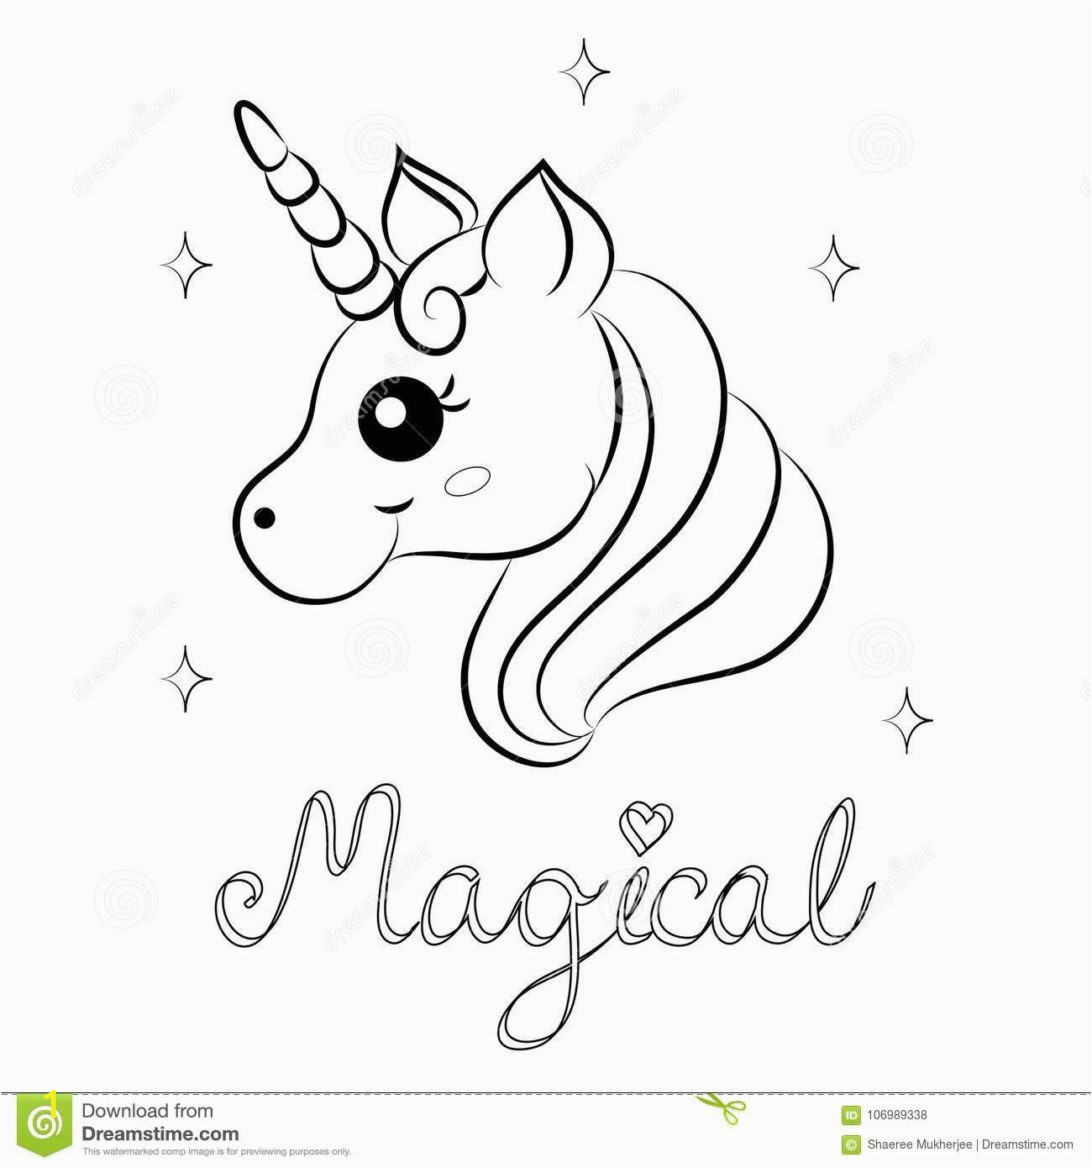 Unicorn Cat Coloring Pages Annette Lux Free Coloring Pages Coloring Pages for Kids